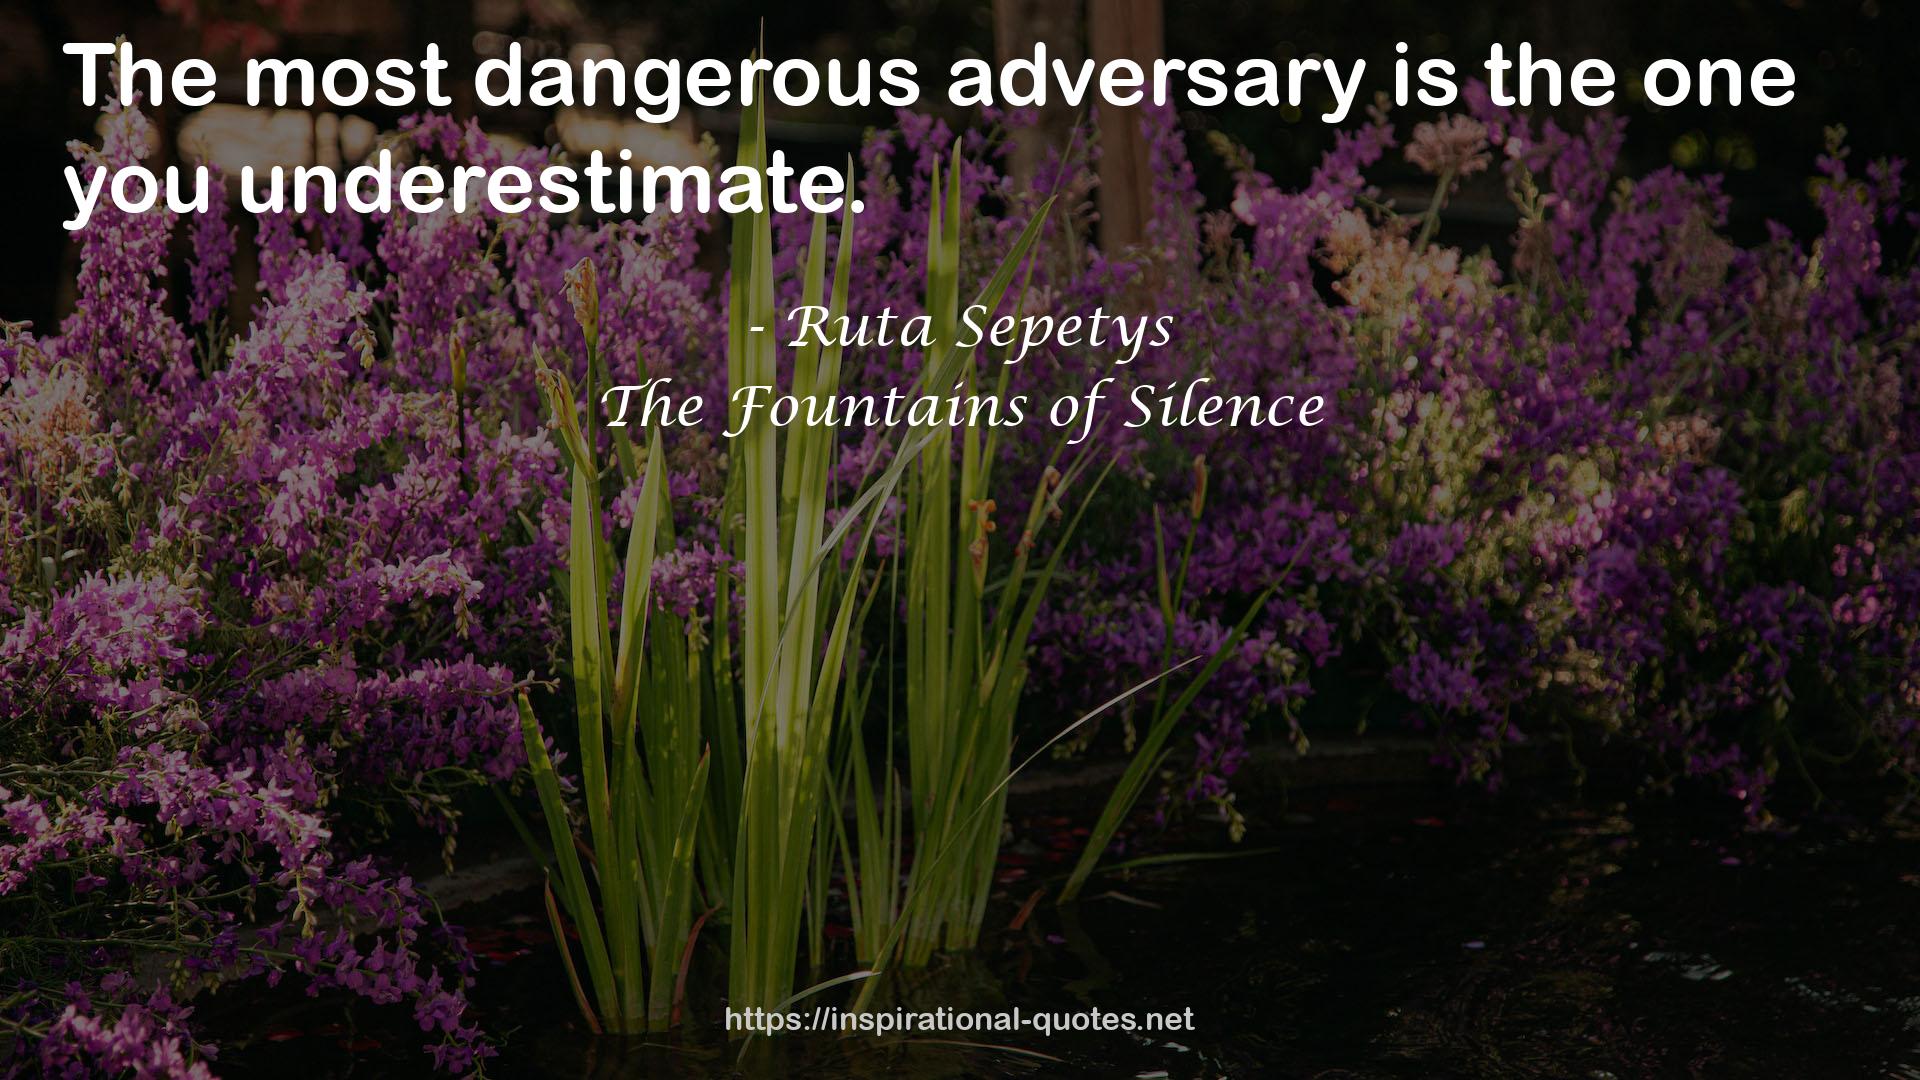 The Fountains of Silence QUOTES